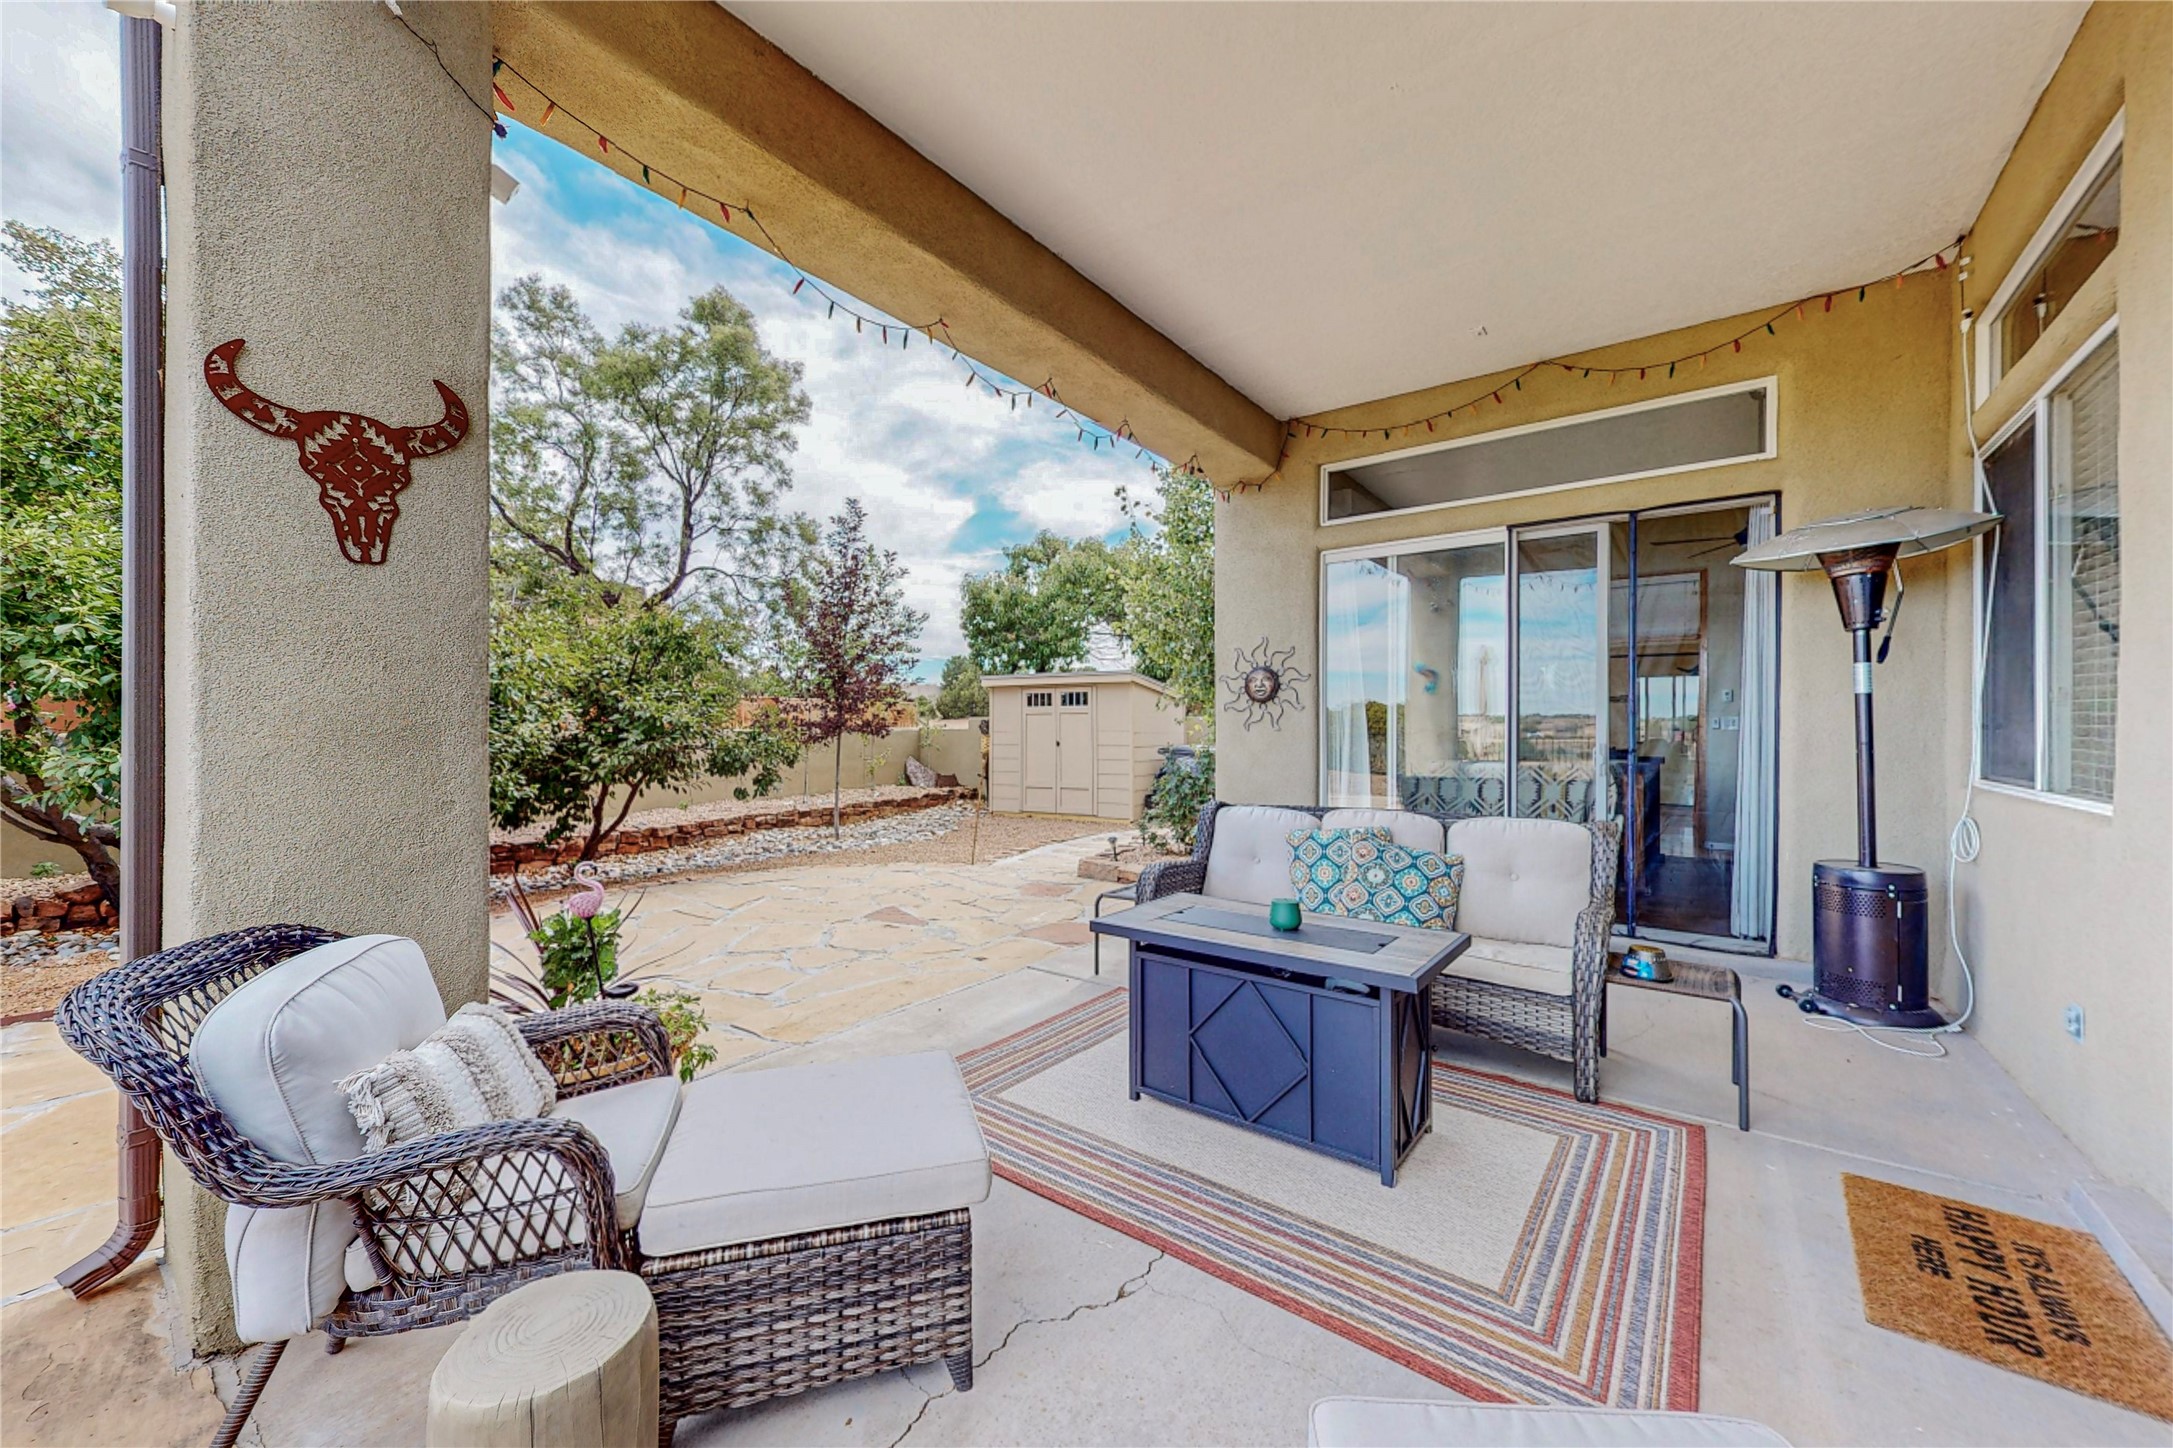 19 Deans B, Santa Fe, New Mexico 87508, 3 Bedrooms Bedrooms, ,2 BathroomsBathrooms,Residential,For Sale,19 Deans B,202400334